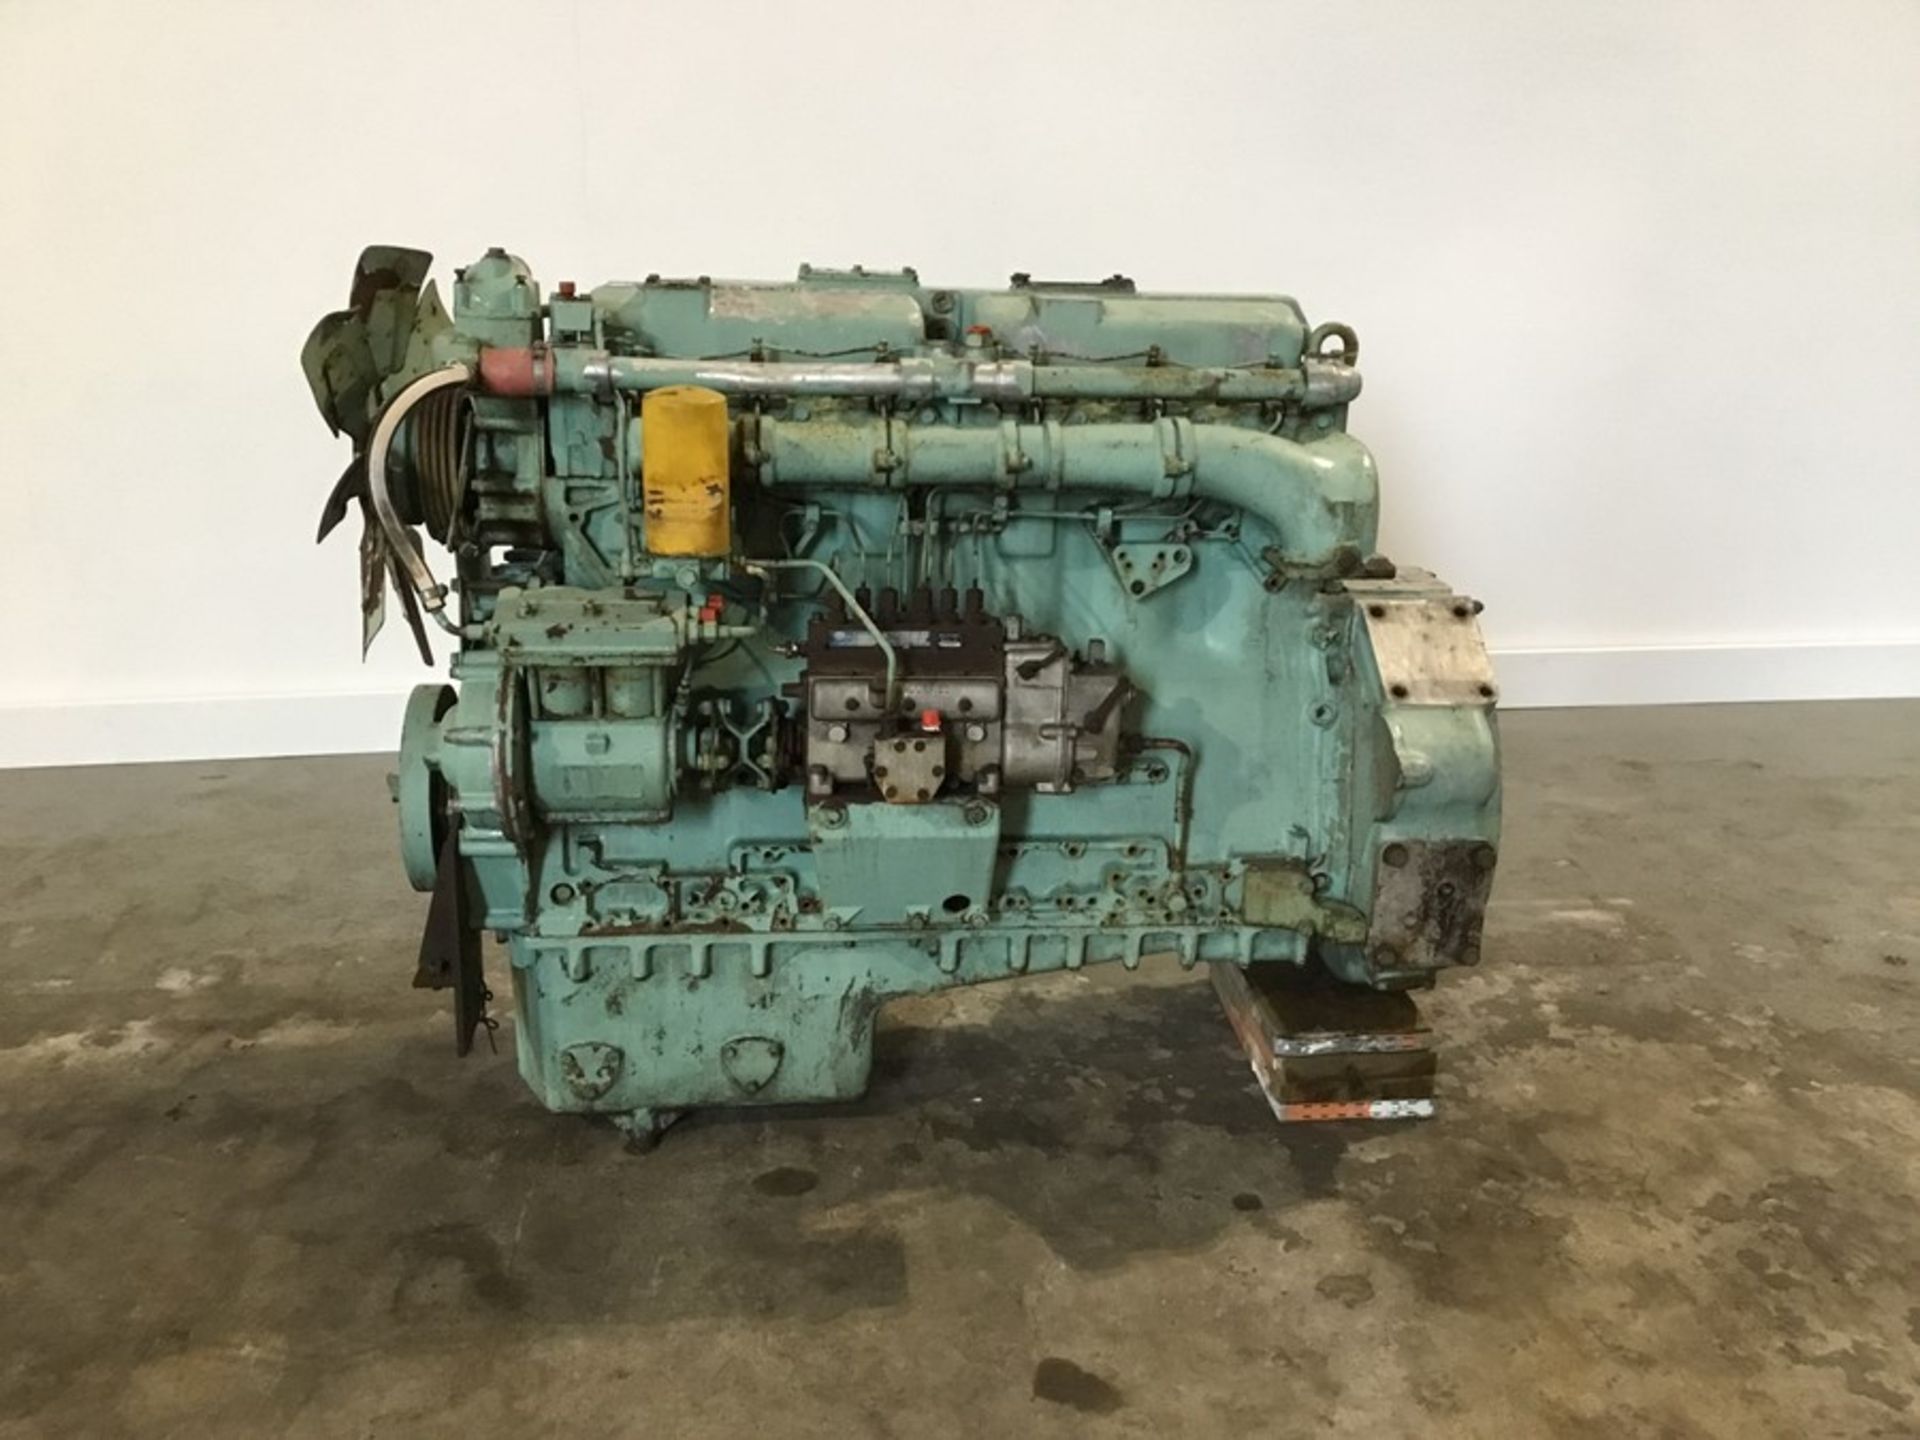 Rolls Royce E220 Diesel engine: Rolls Royce E220 6cyl serial number 628223D-1454/48614 Build - Image 6 of 18